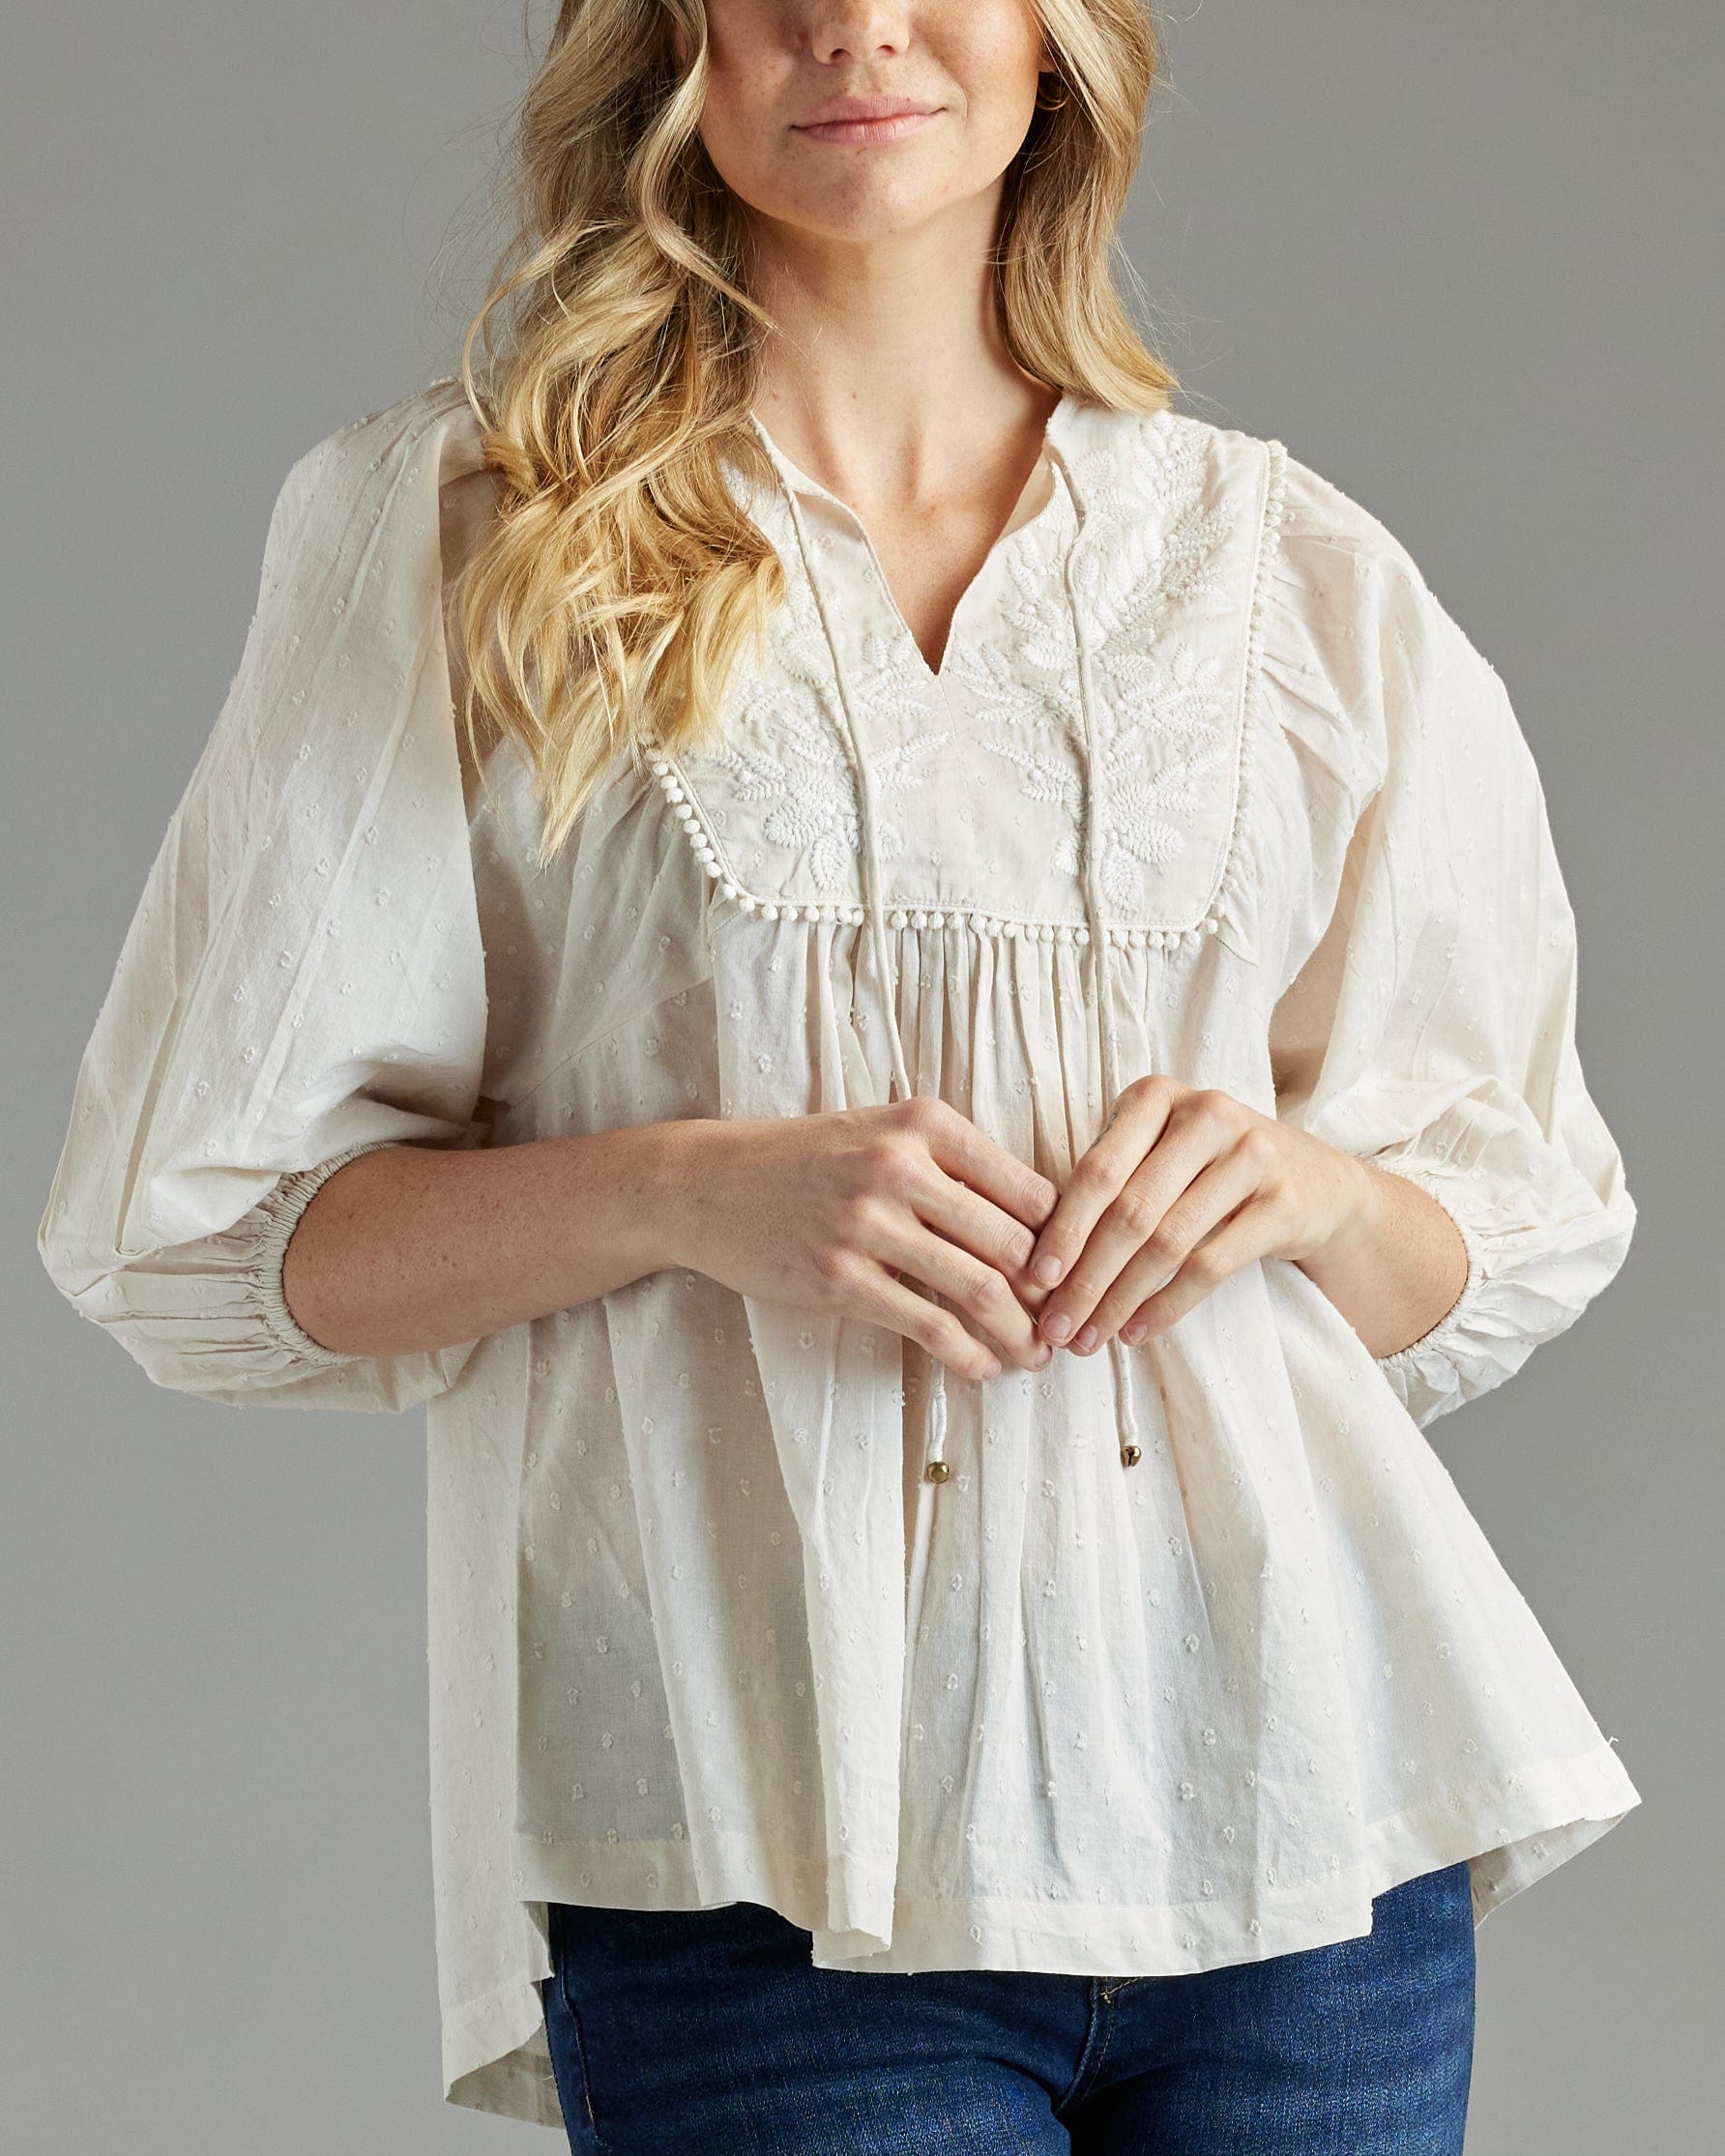 Woman in a white blouse with 3/4 length sleeves and embroidery on bib